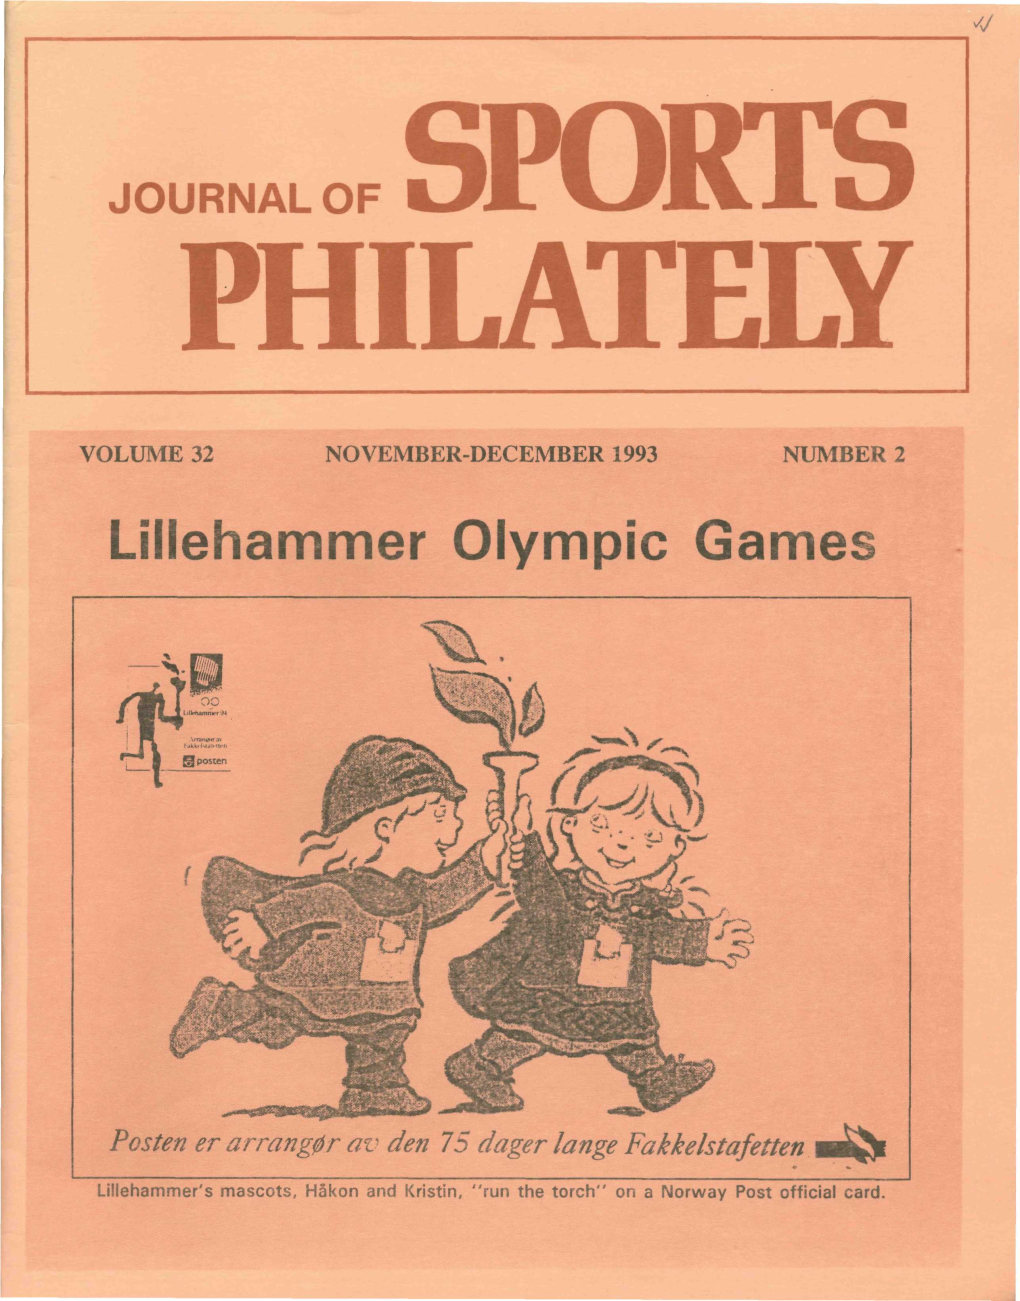 Lillehammer Olympic Games